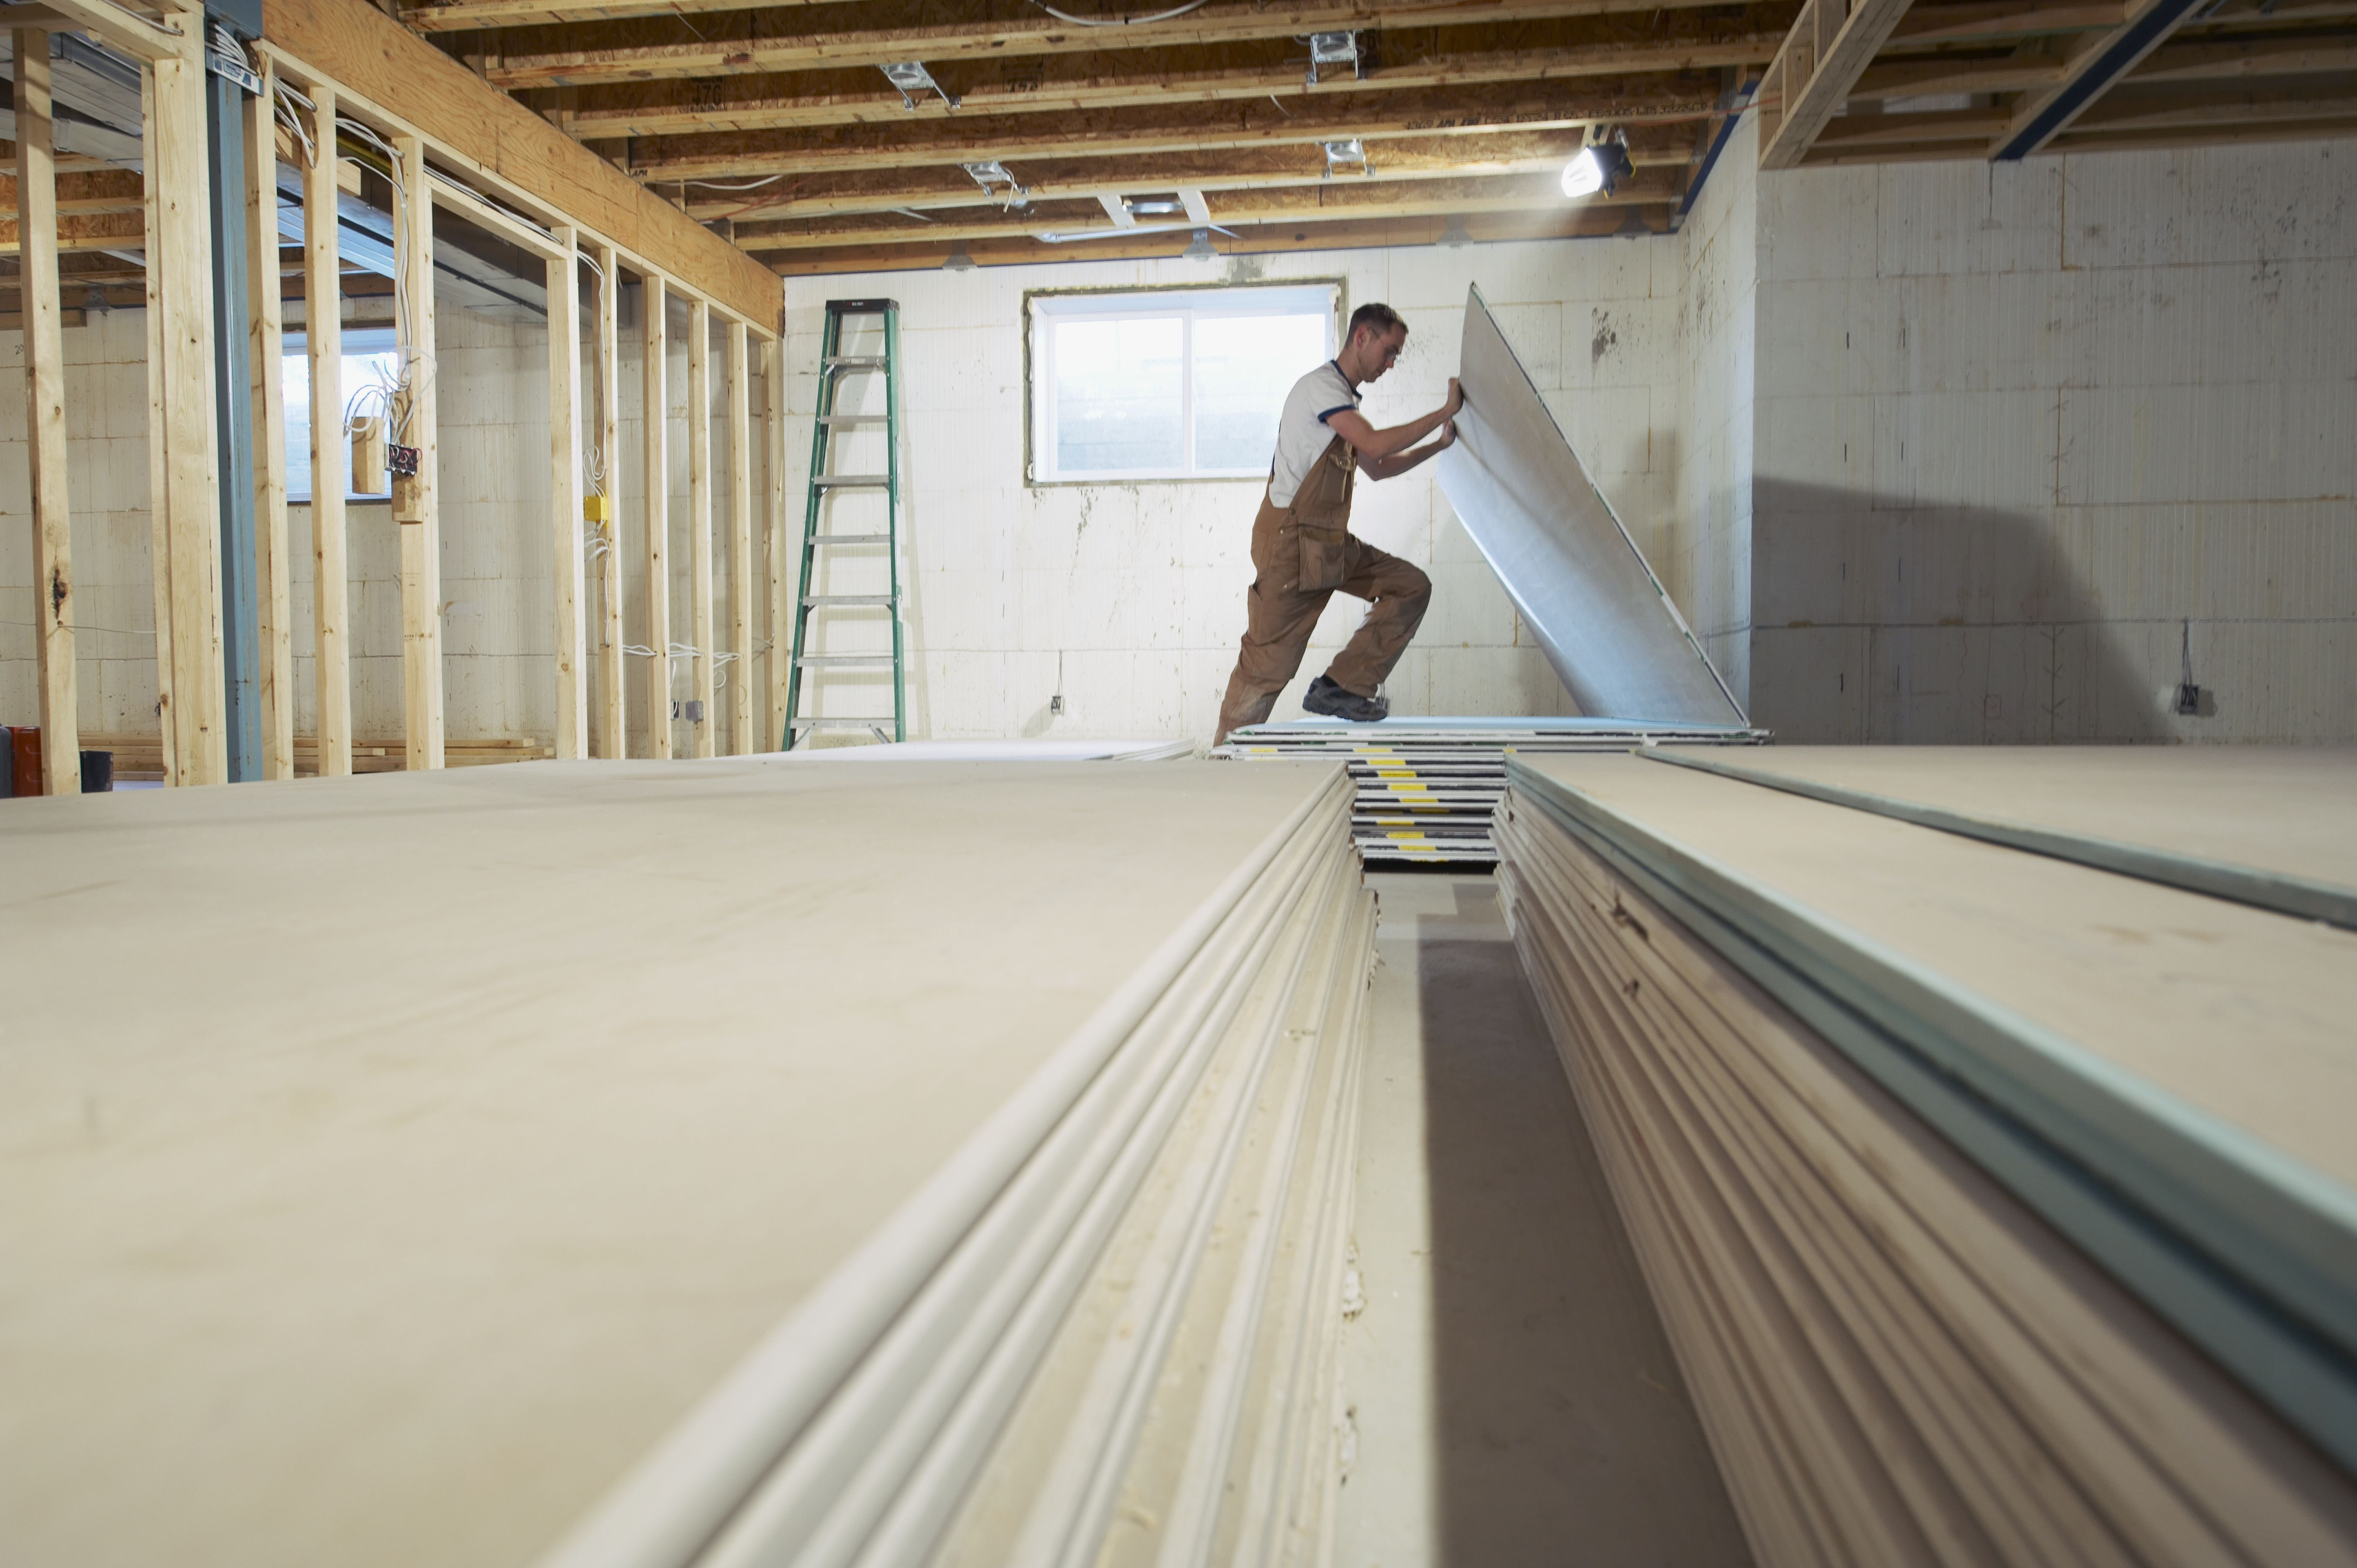 26 Spectacular Hardwood Floor Cost Calculator Canada 2024 free download hardwood floor cost calculator canada of average basement finishing cost for man installing drywall in new house 522951112 5b12da6dba6177003d66594d